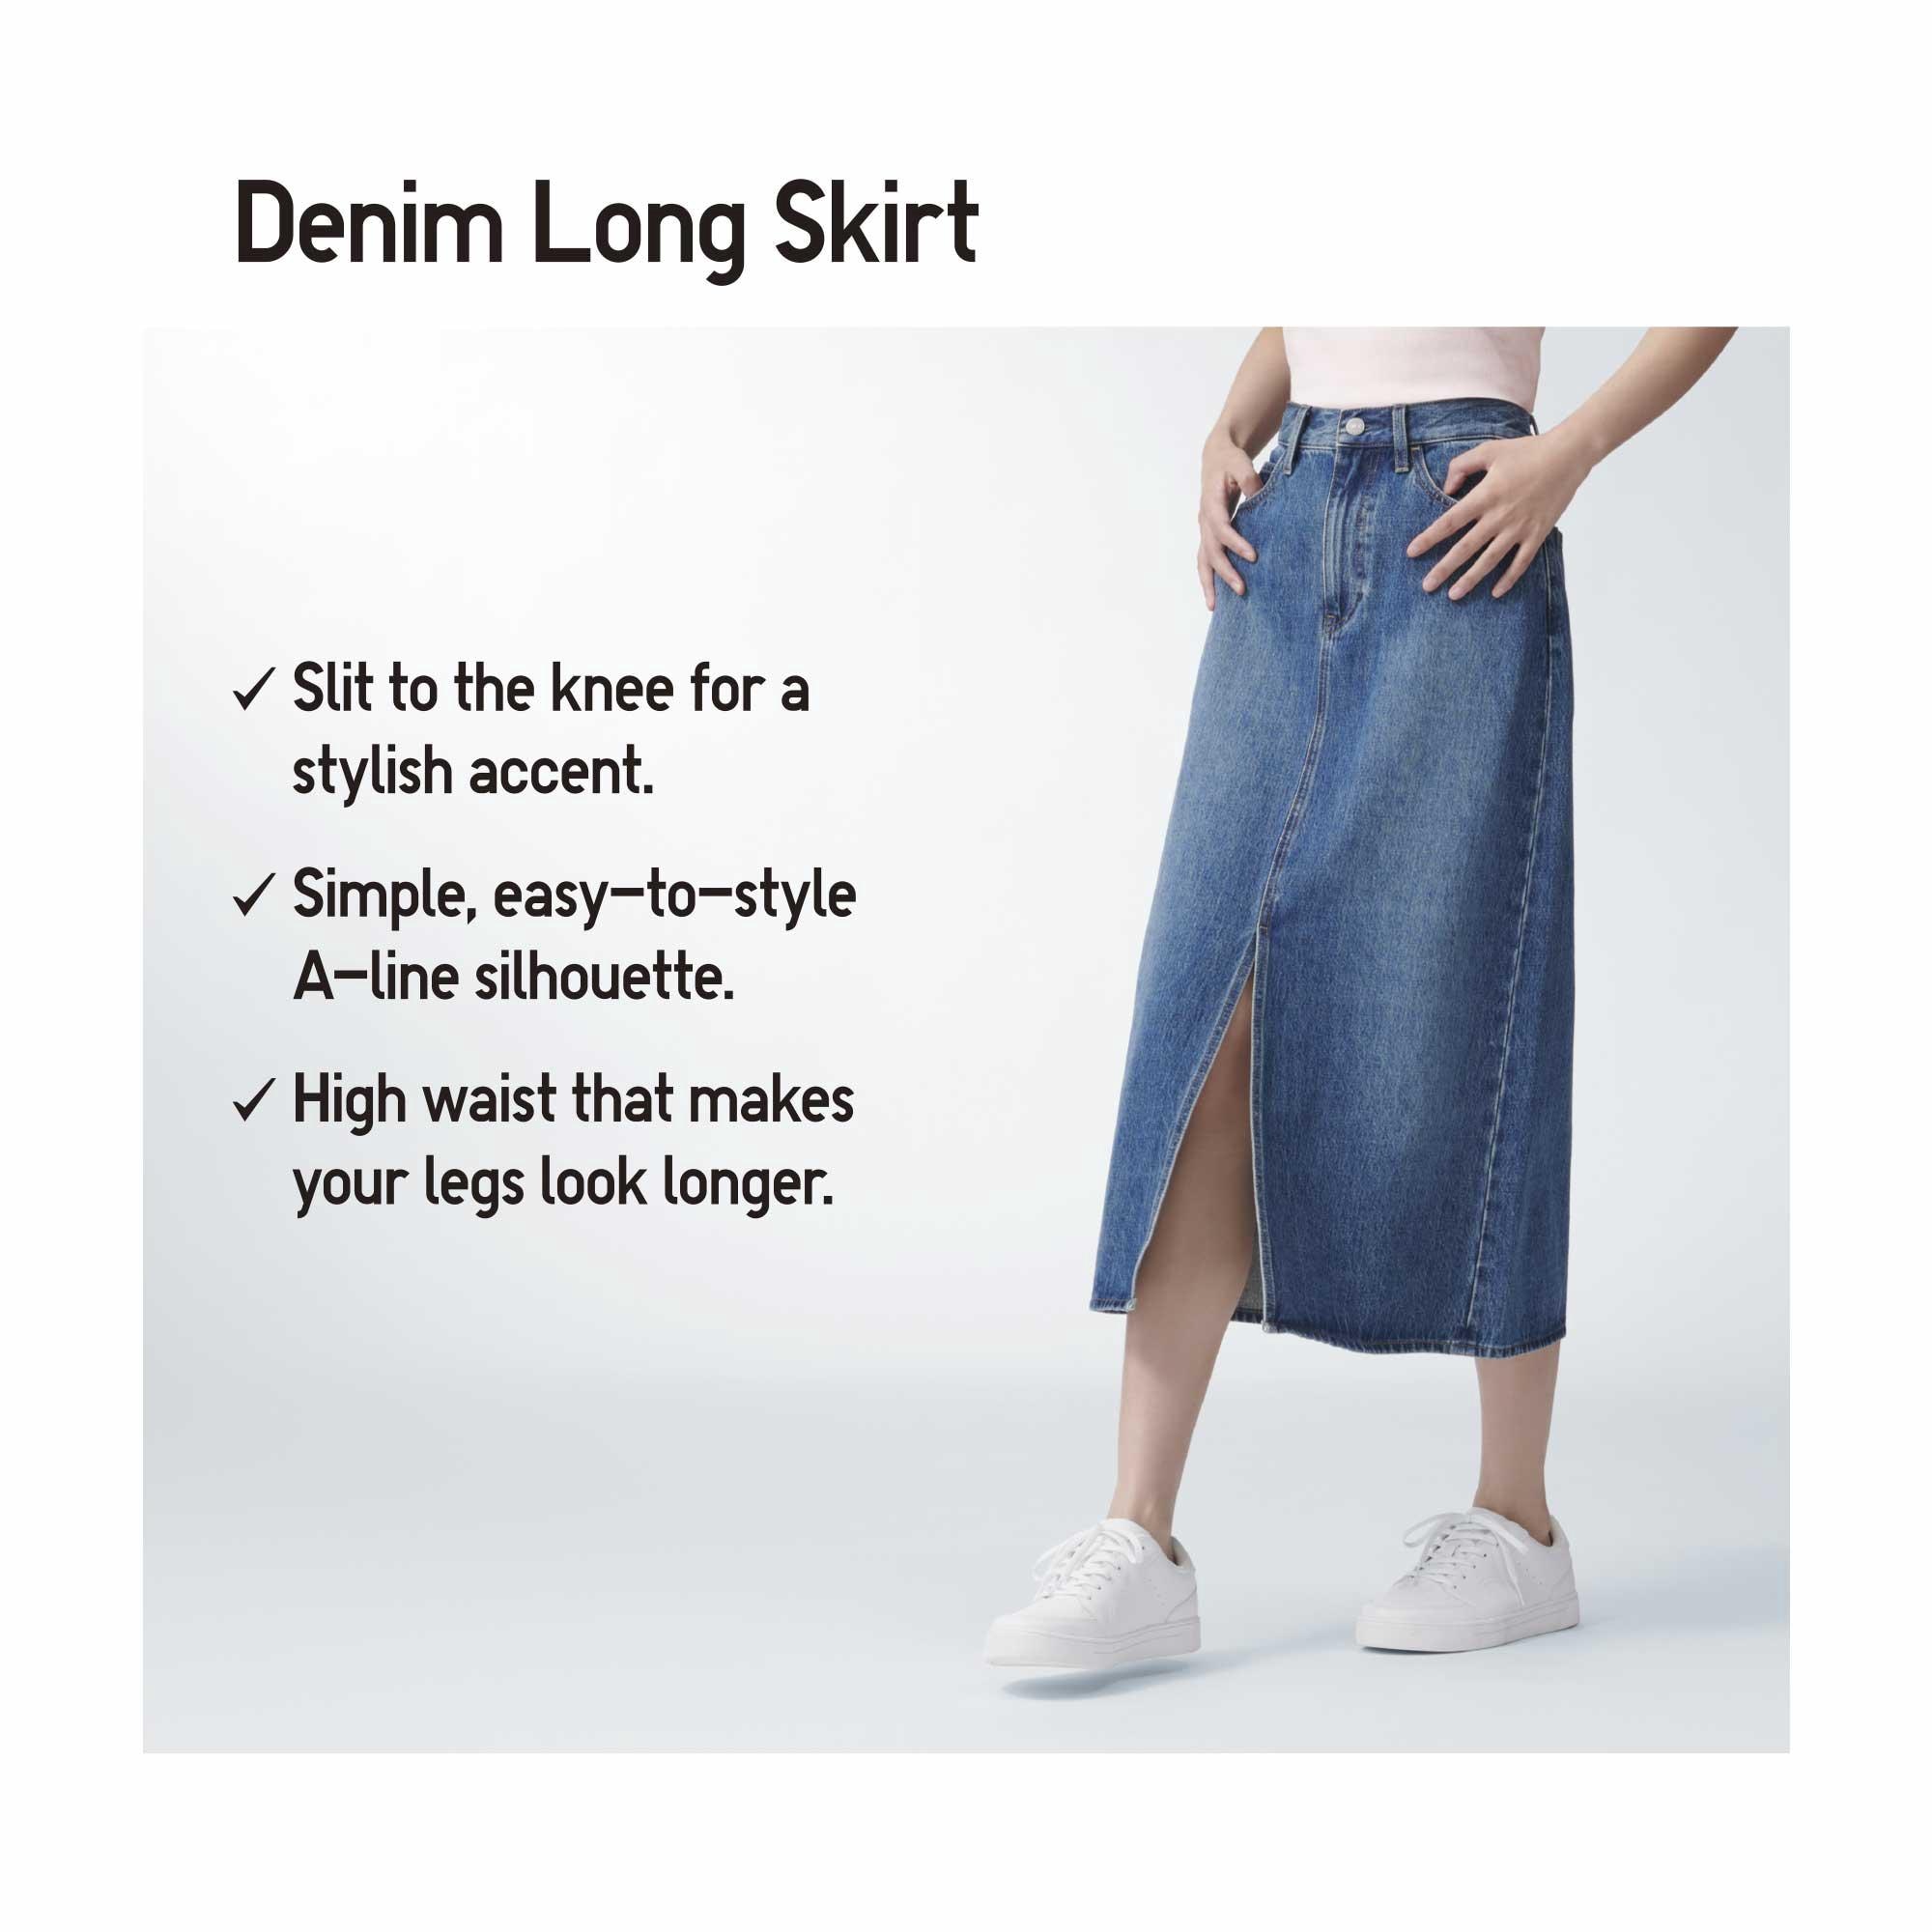 Mermaid Fish Tail Denim Skirt Ankle Length Zipper Empire High Waist Extra  High Waisted Jeans For Women In S XL From Kong003, $14.96 | DHgate.Com